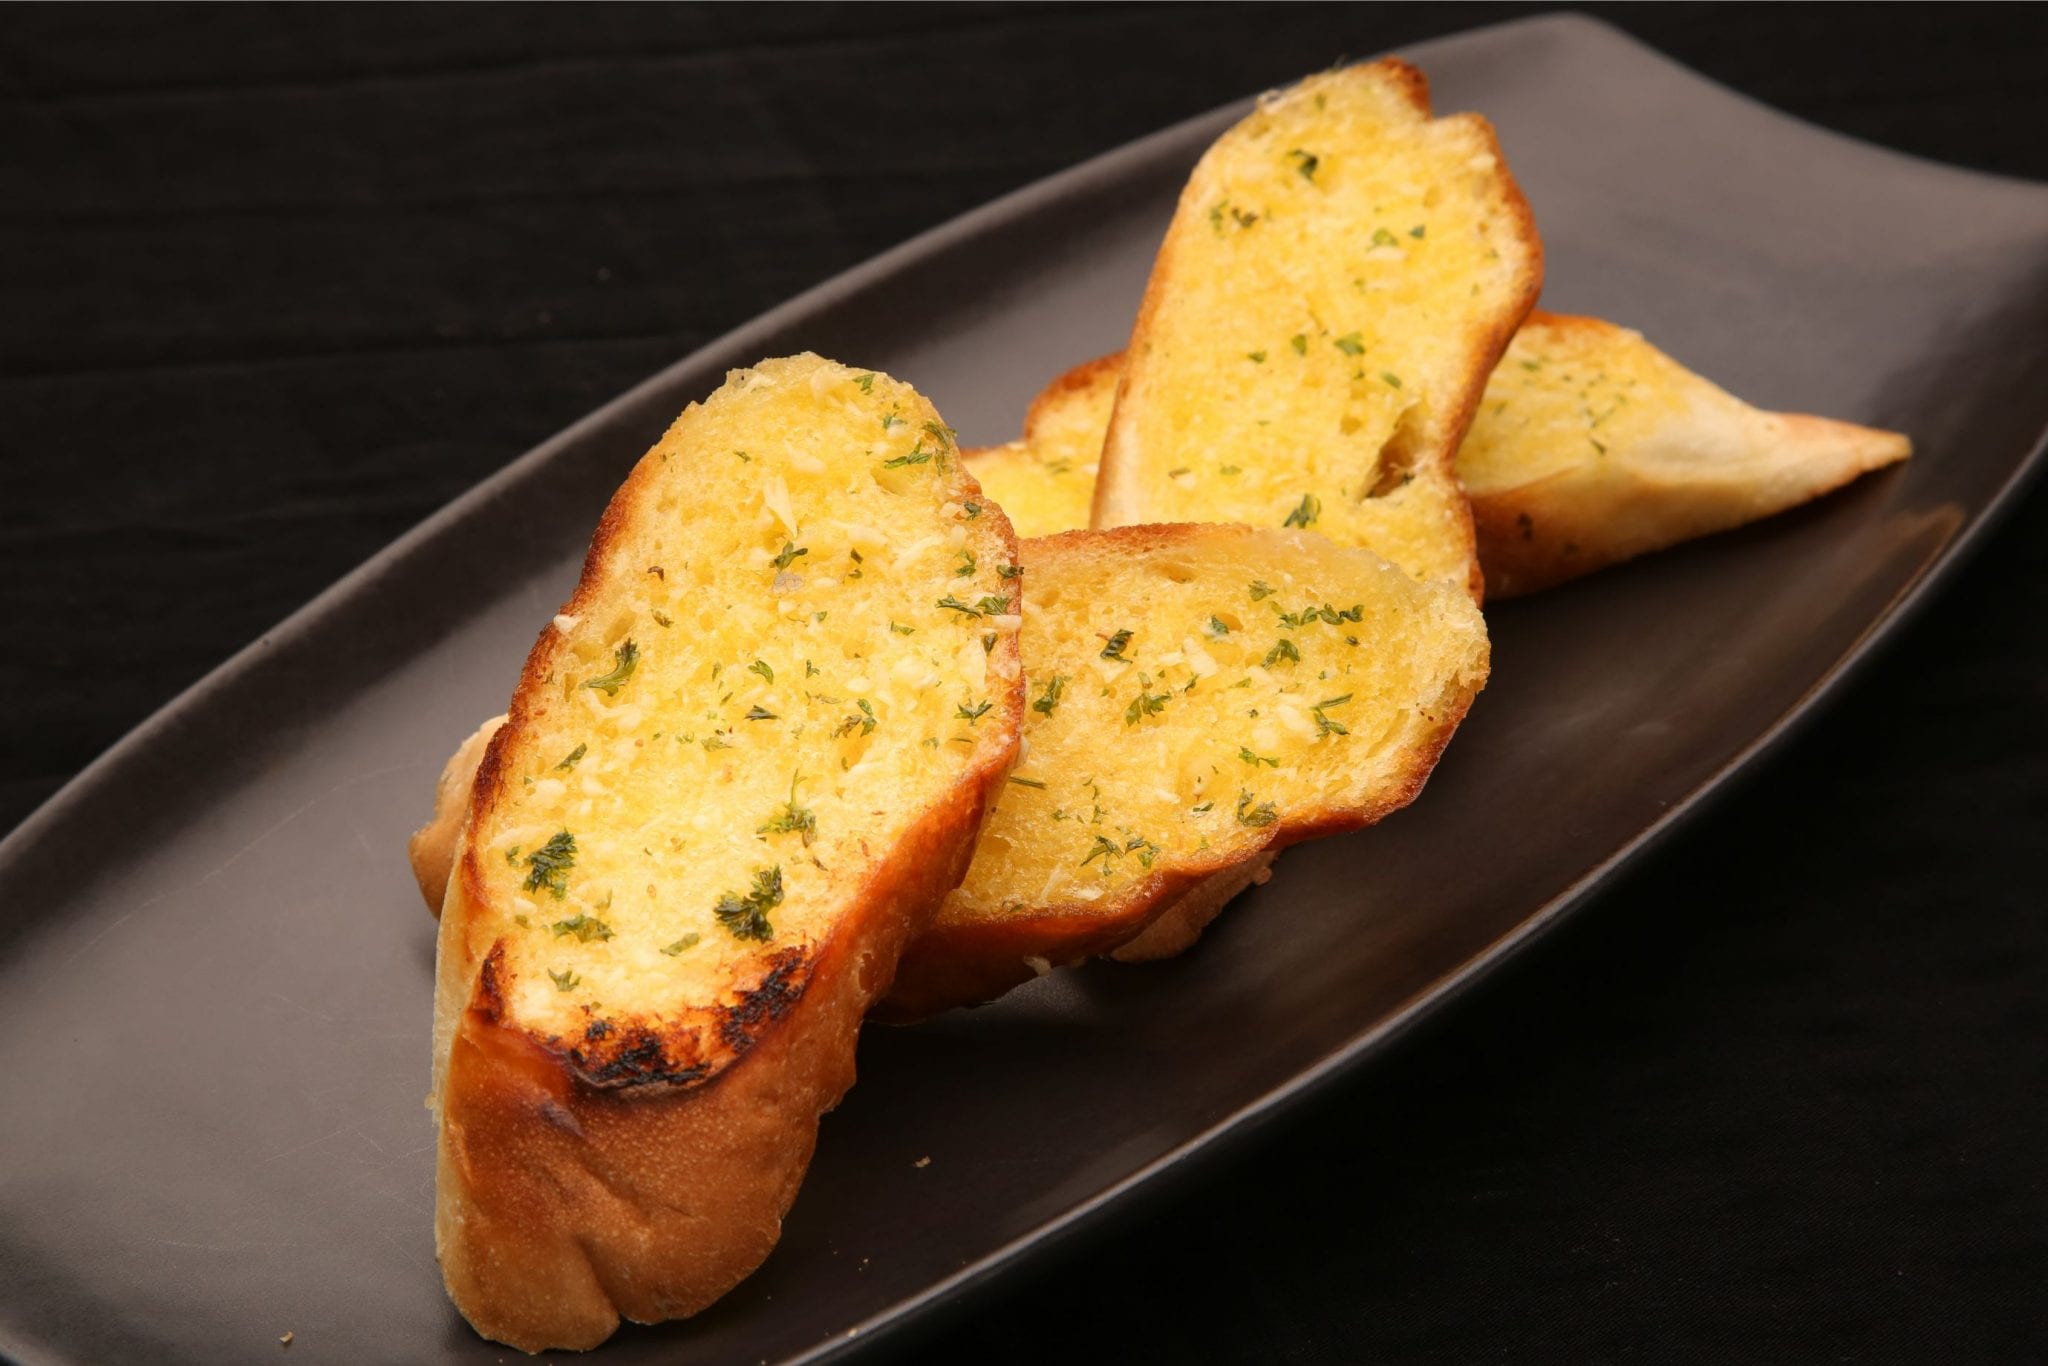 slices of weed garlic bread on a black abstract plate